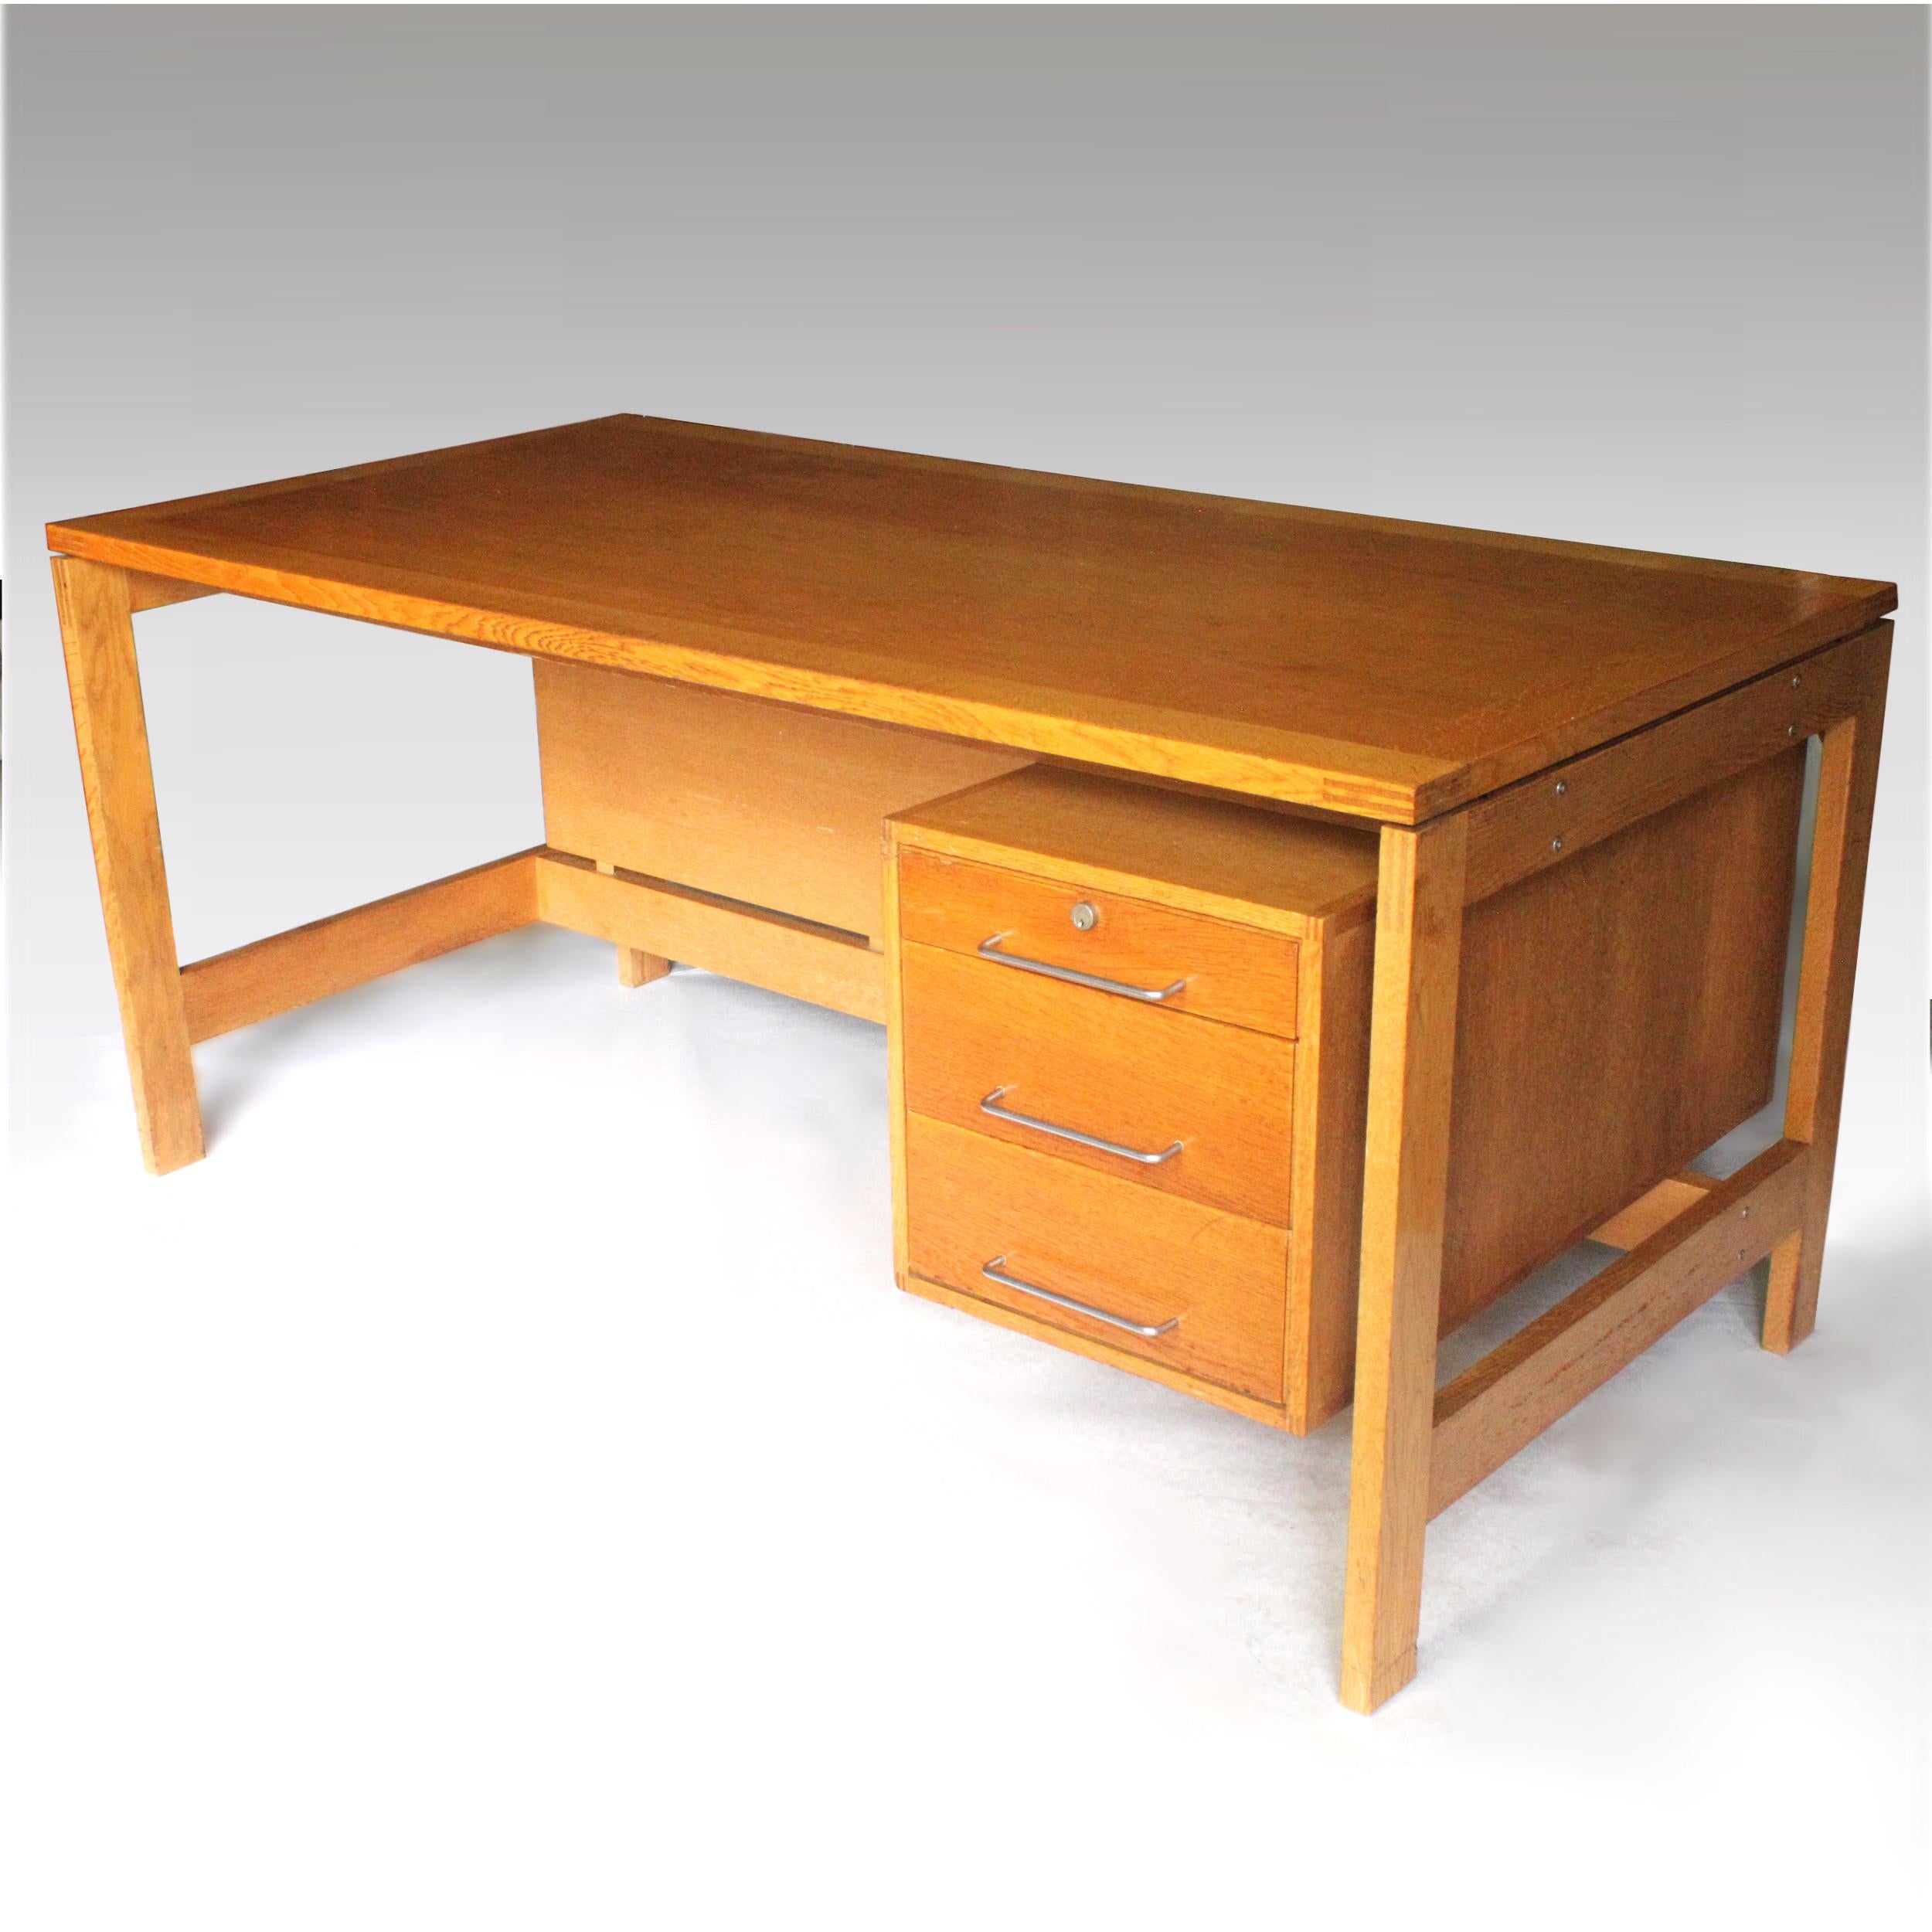 This is one great Dane! Designed by Henning Jensen & Torben Valeur for the furniture manufacturer Munch Møbler of Denmark, this desk is the epitome of Classic Danish design. Desk features solid oak construction with gorgeous exposed corner joinery,